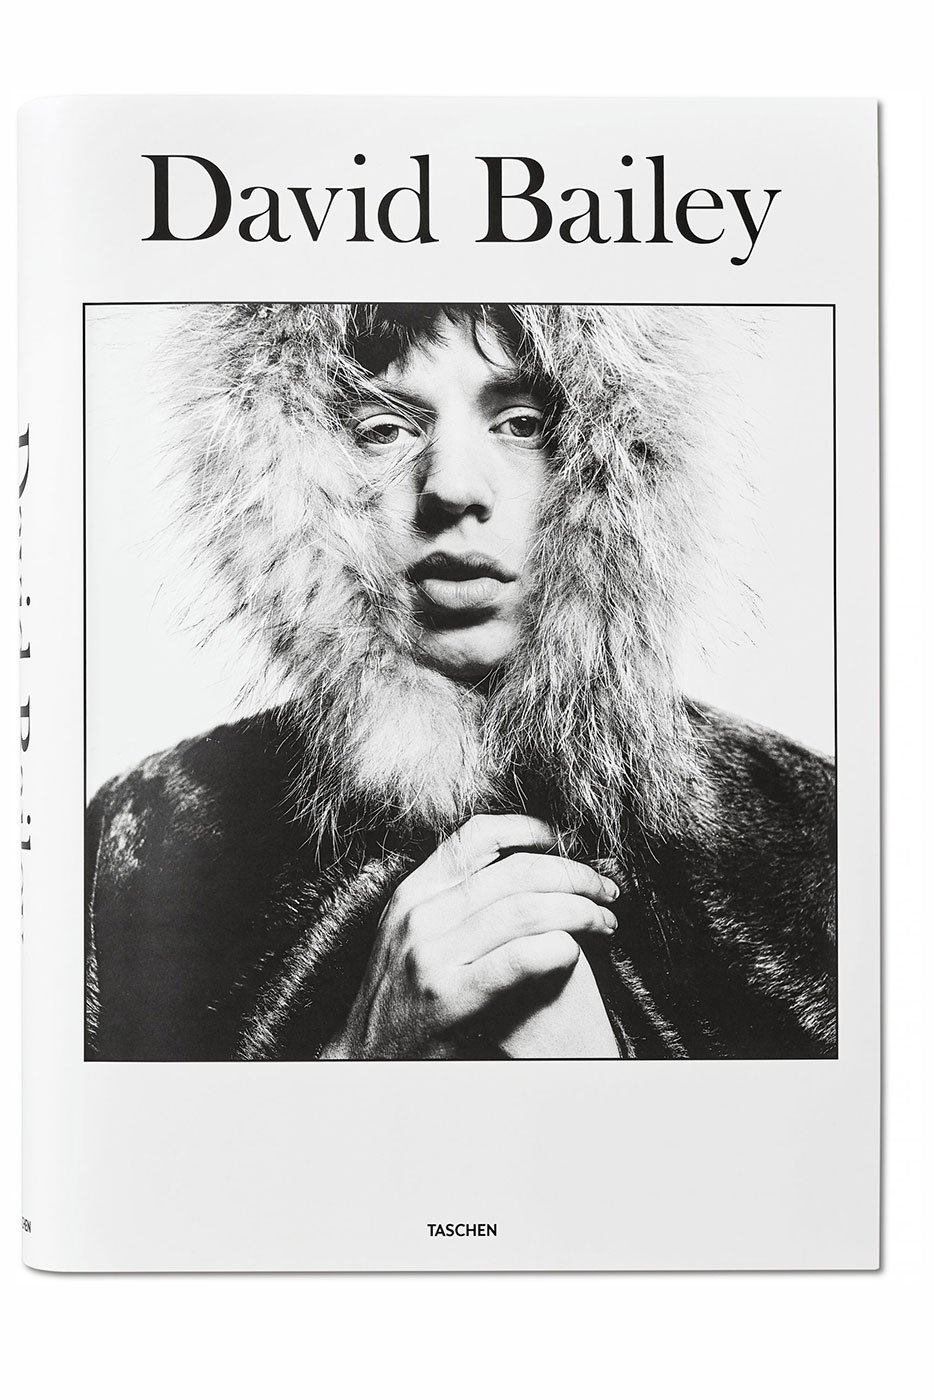 This stunning new David Bailey book is a work of art in itself ...